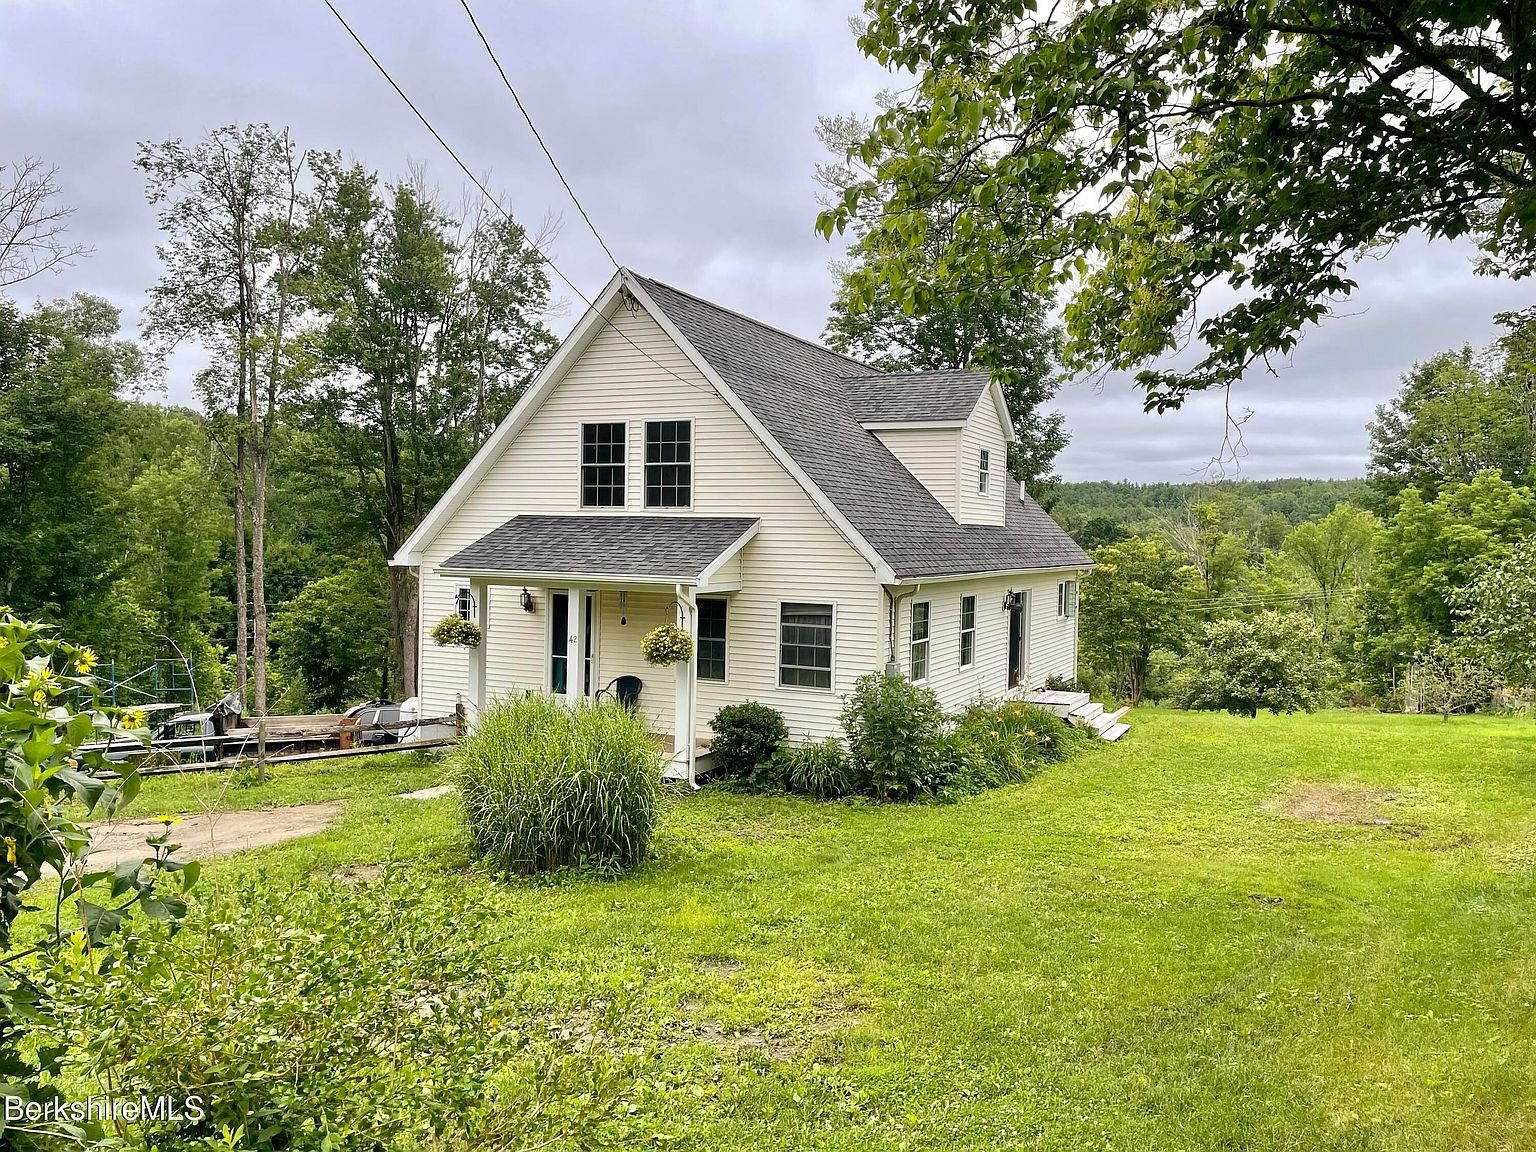 42 W Pine St, Lee, MA 01238 | Zillow